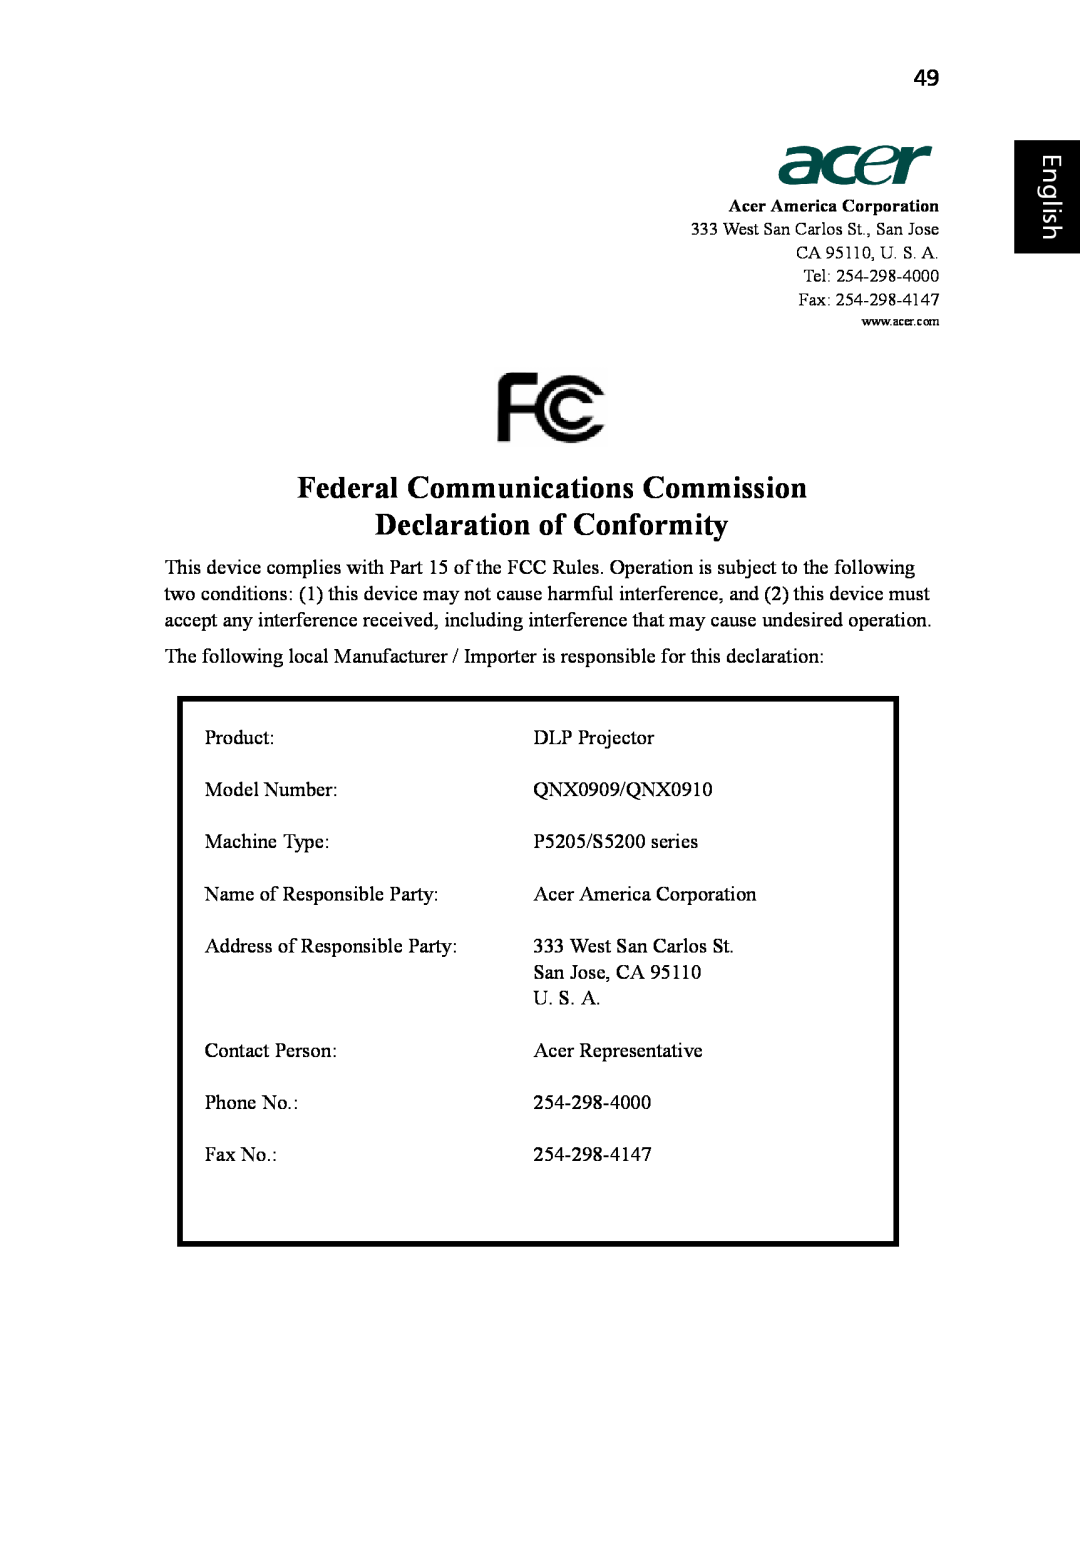 Acer P5205 manual Federal Communications Commission Declaration of Conformity, English 